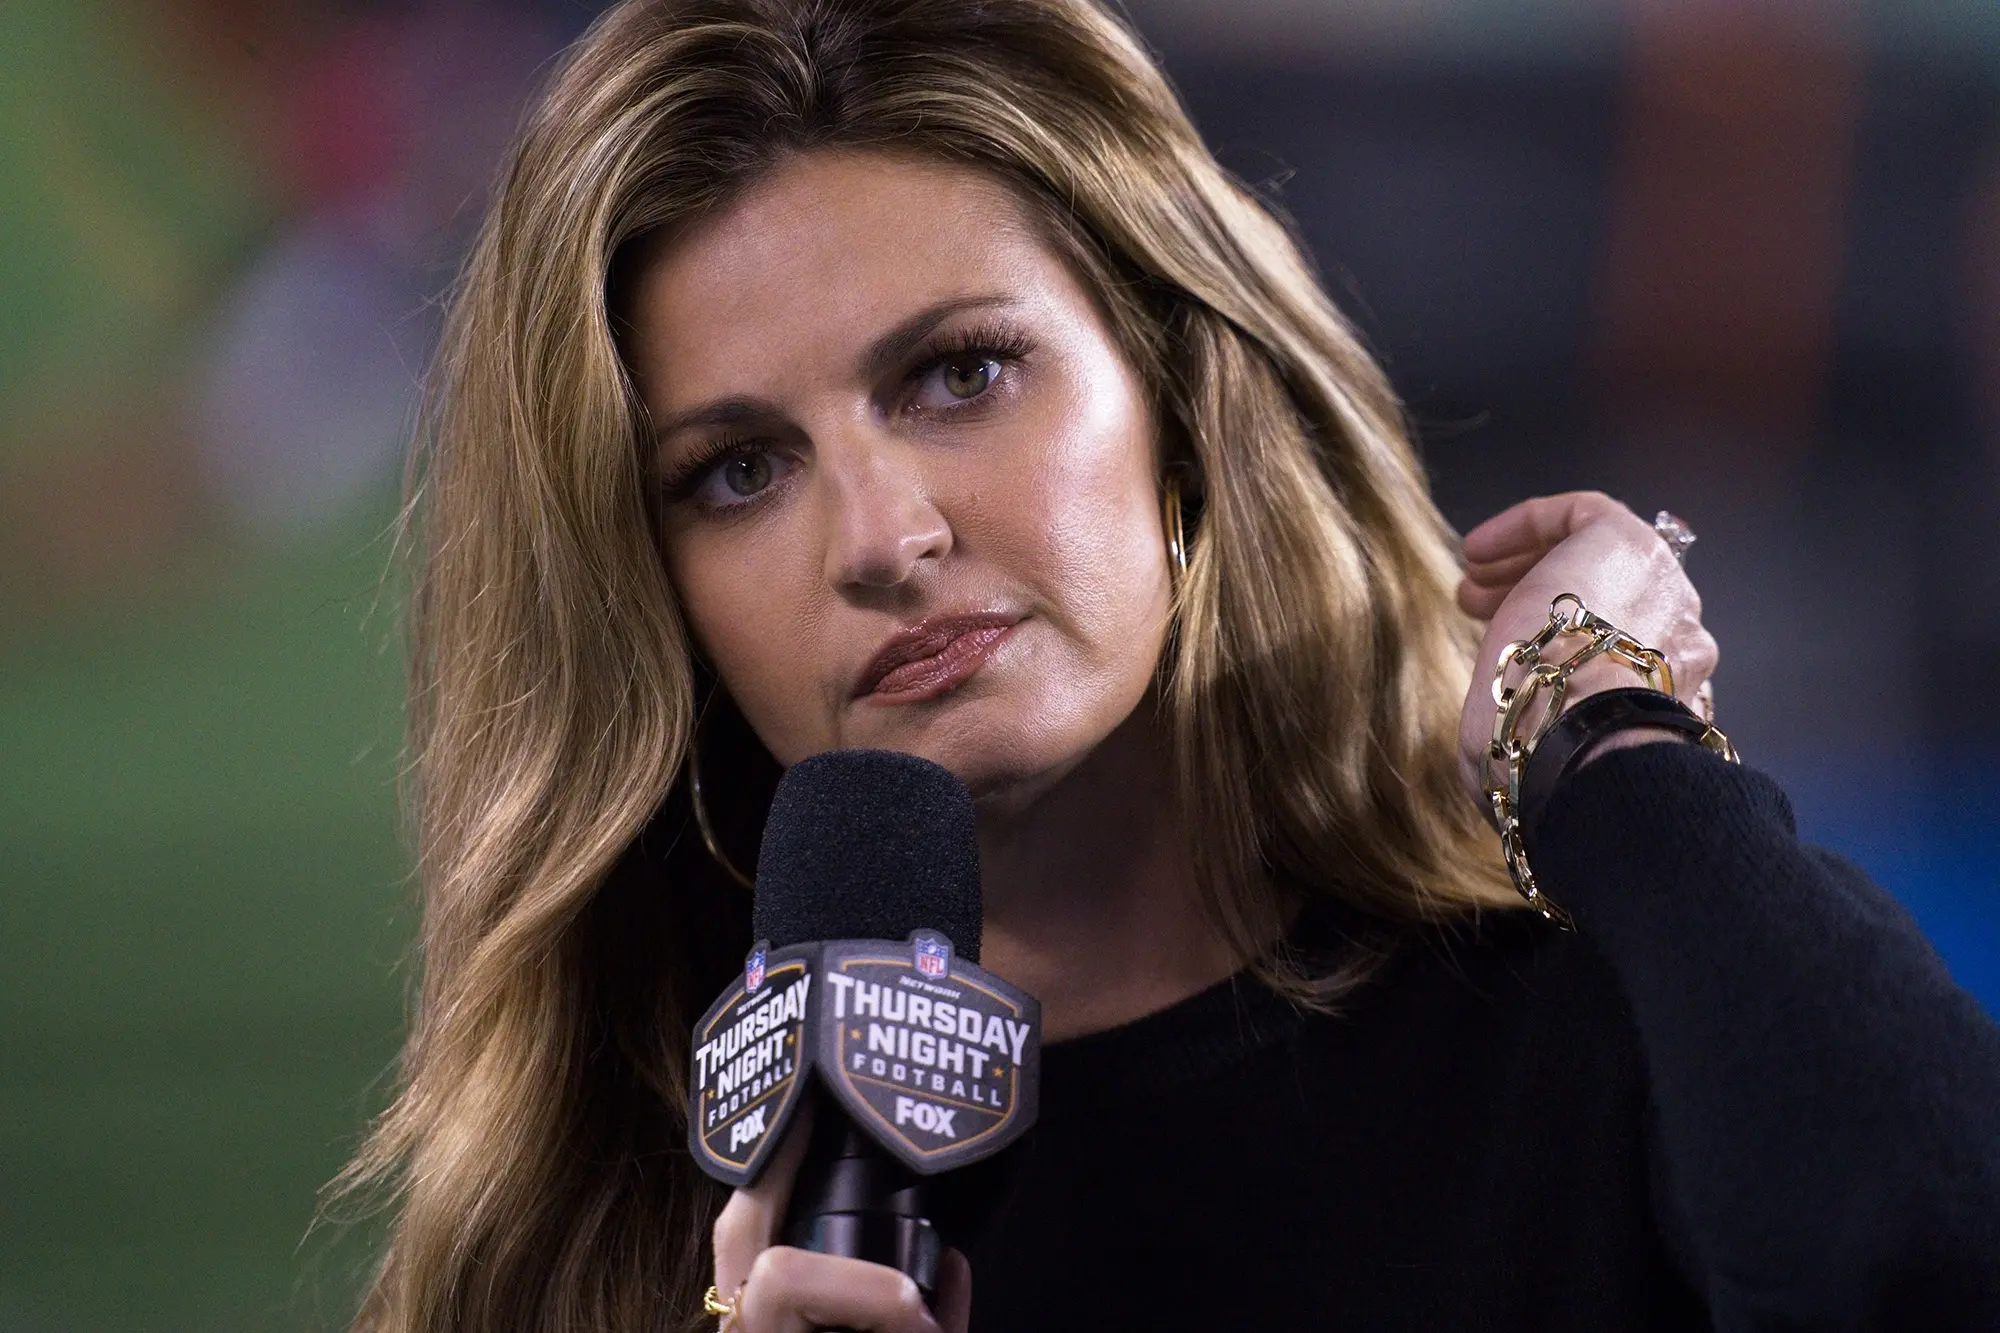 Fox NFL Star Erin Andrews Discusses an Unsettling Sideline Encounter With a Player While Live on Television:  ‘It ruined my day’